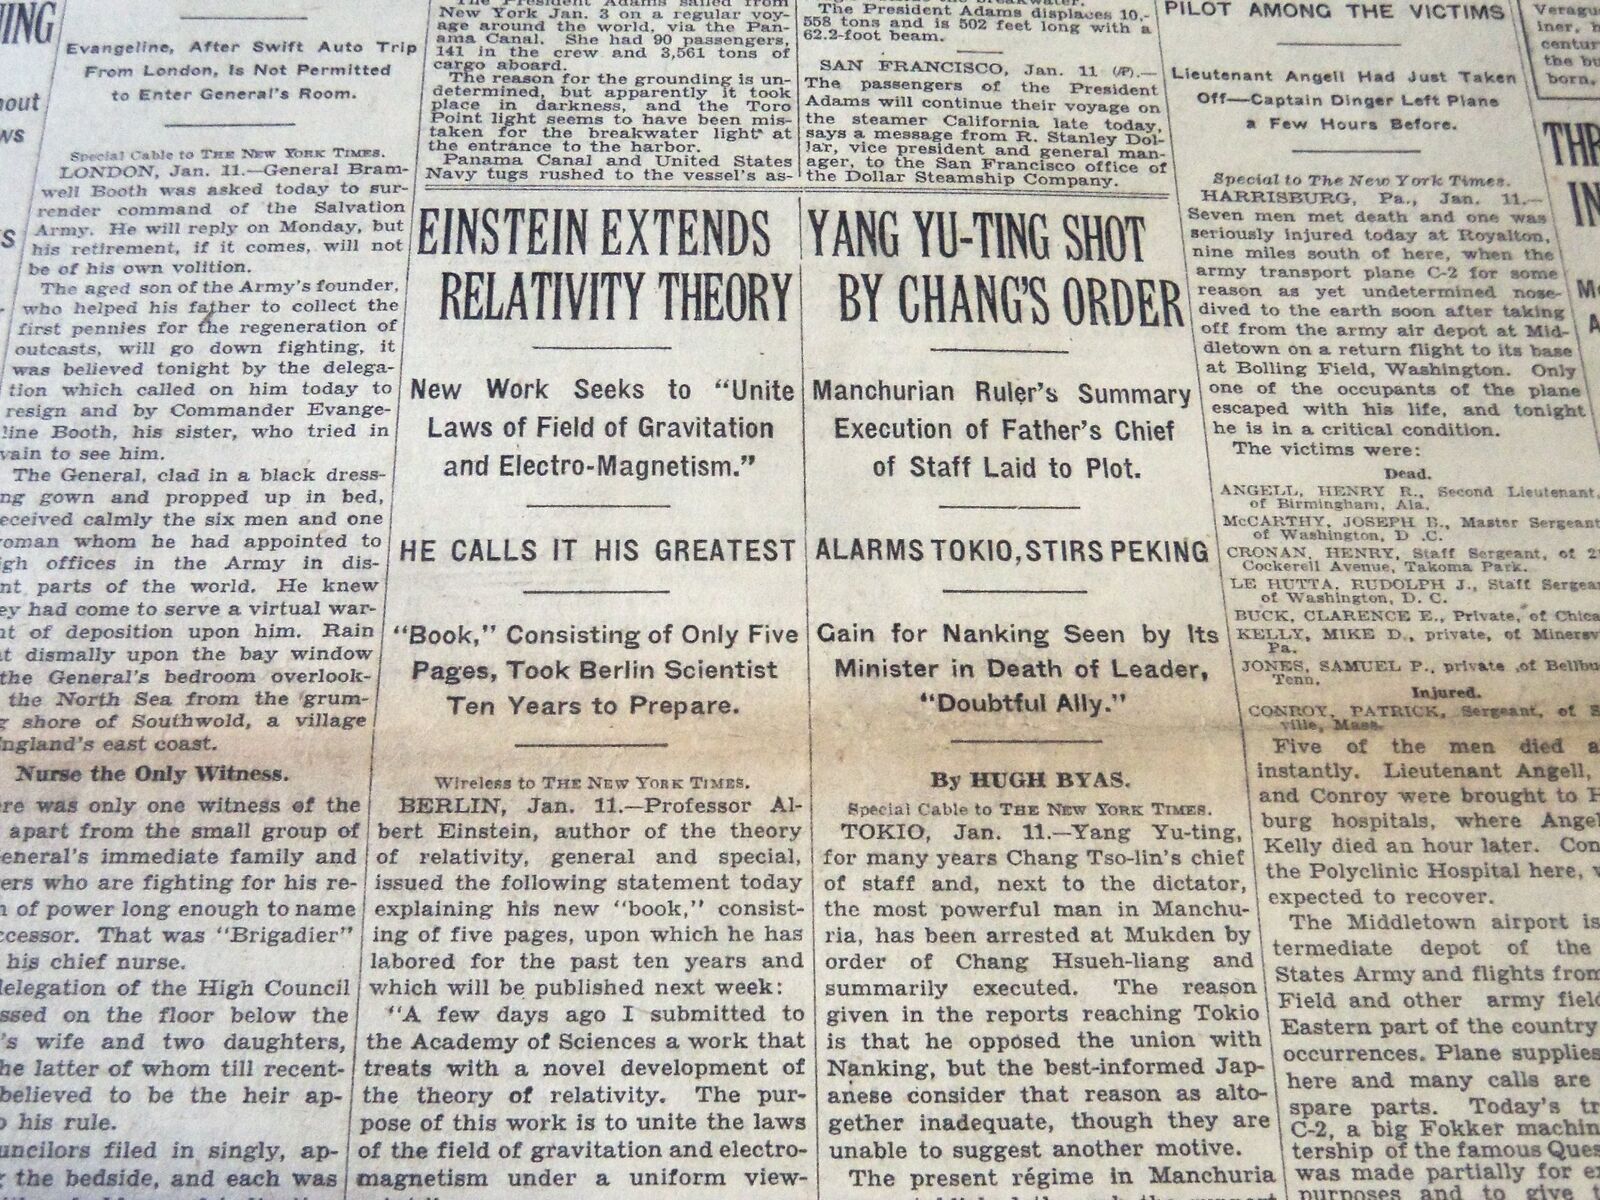 1929 JANUARY 12 NEW YORK TIMES - EINSTEIN EXTENDS RELATIVITY THEORY - NT 6621